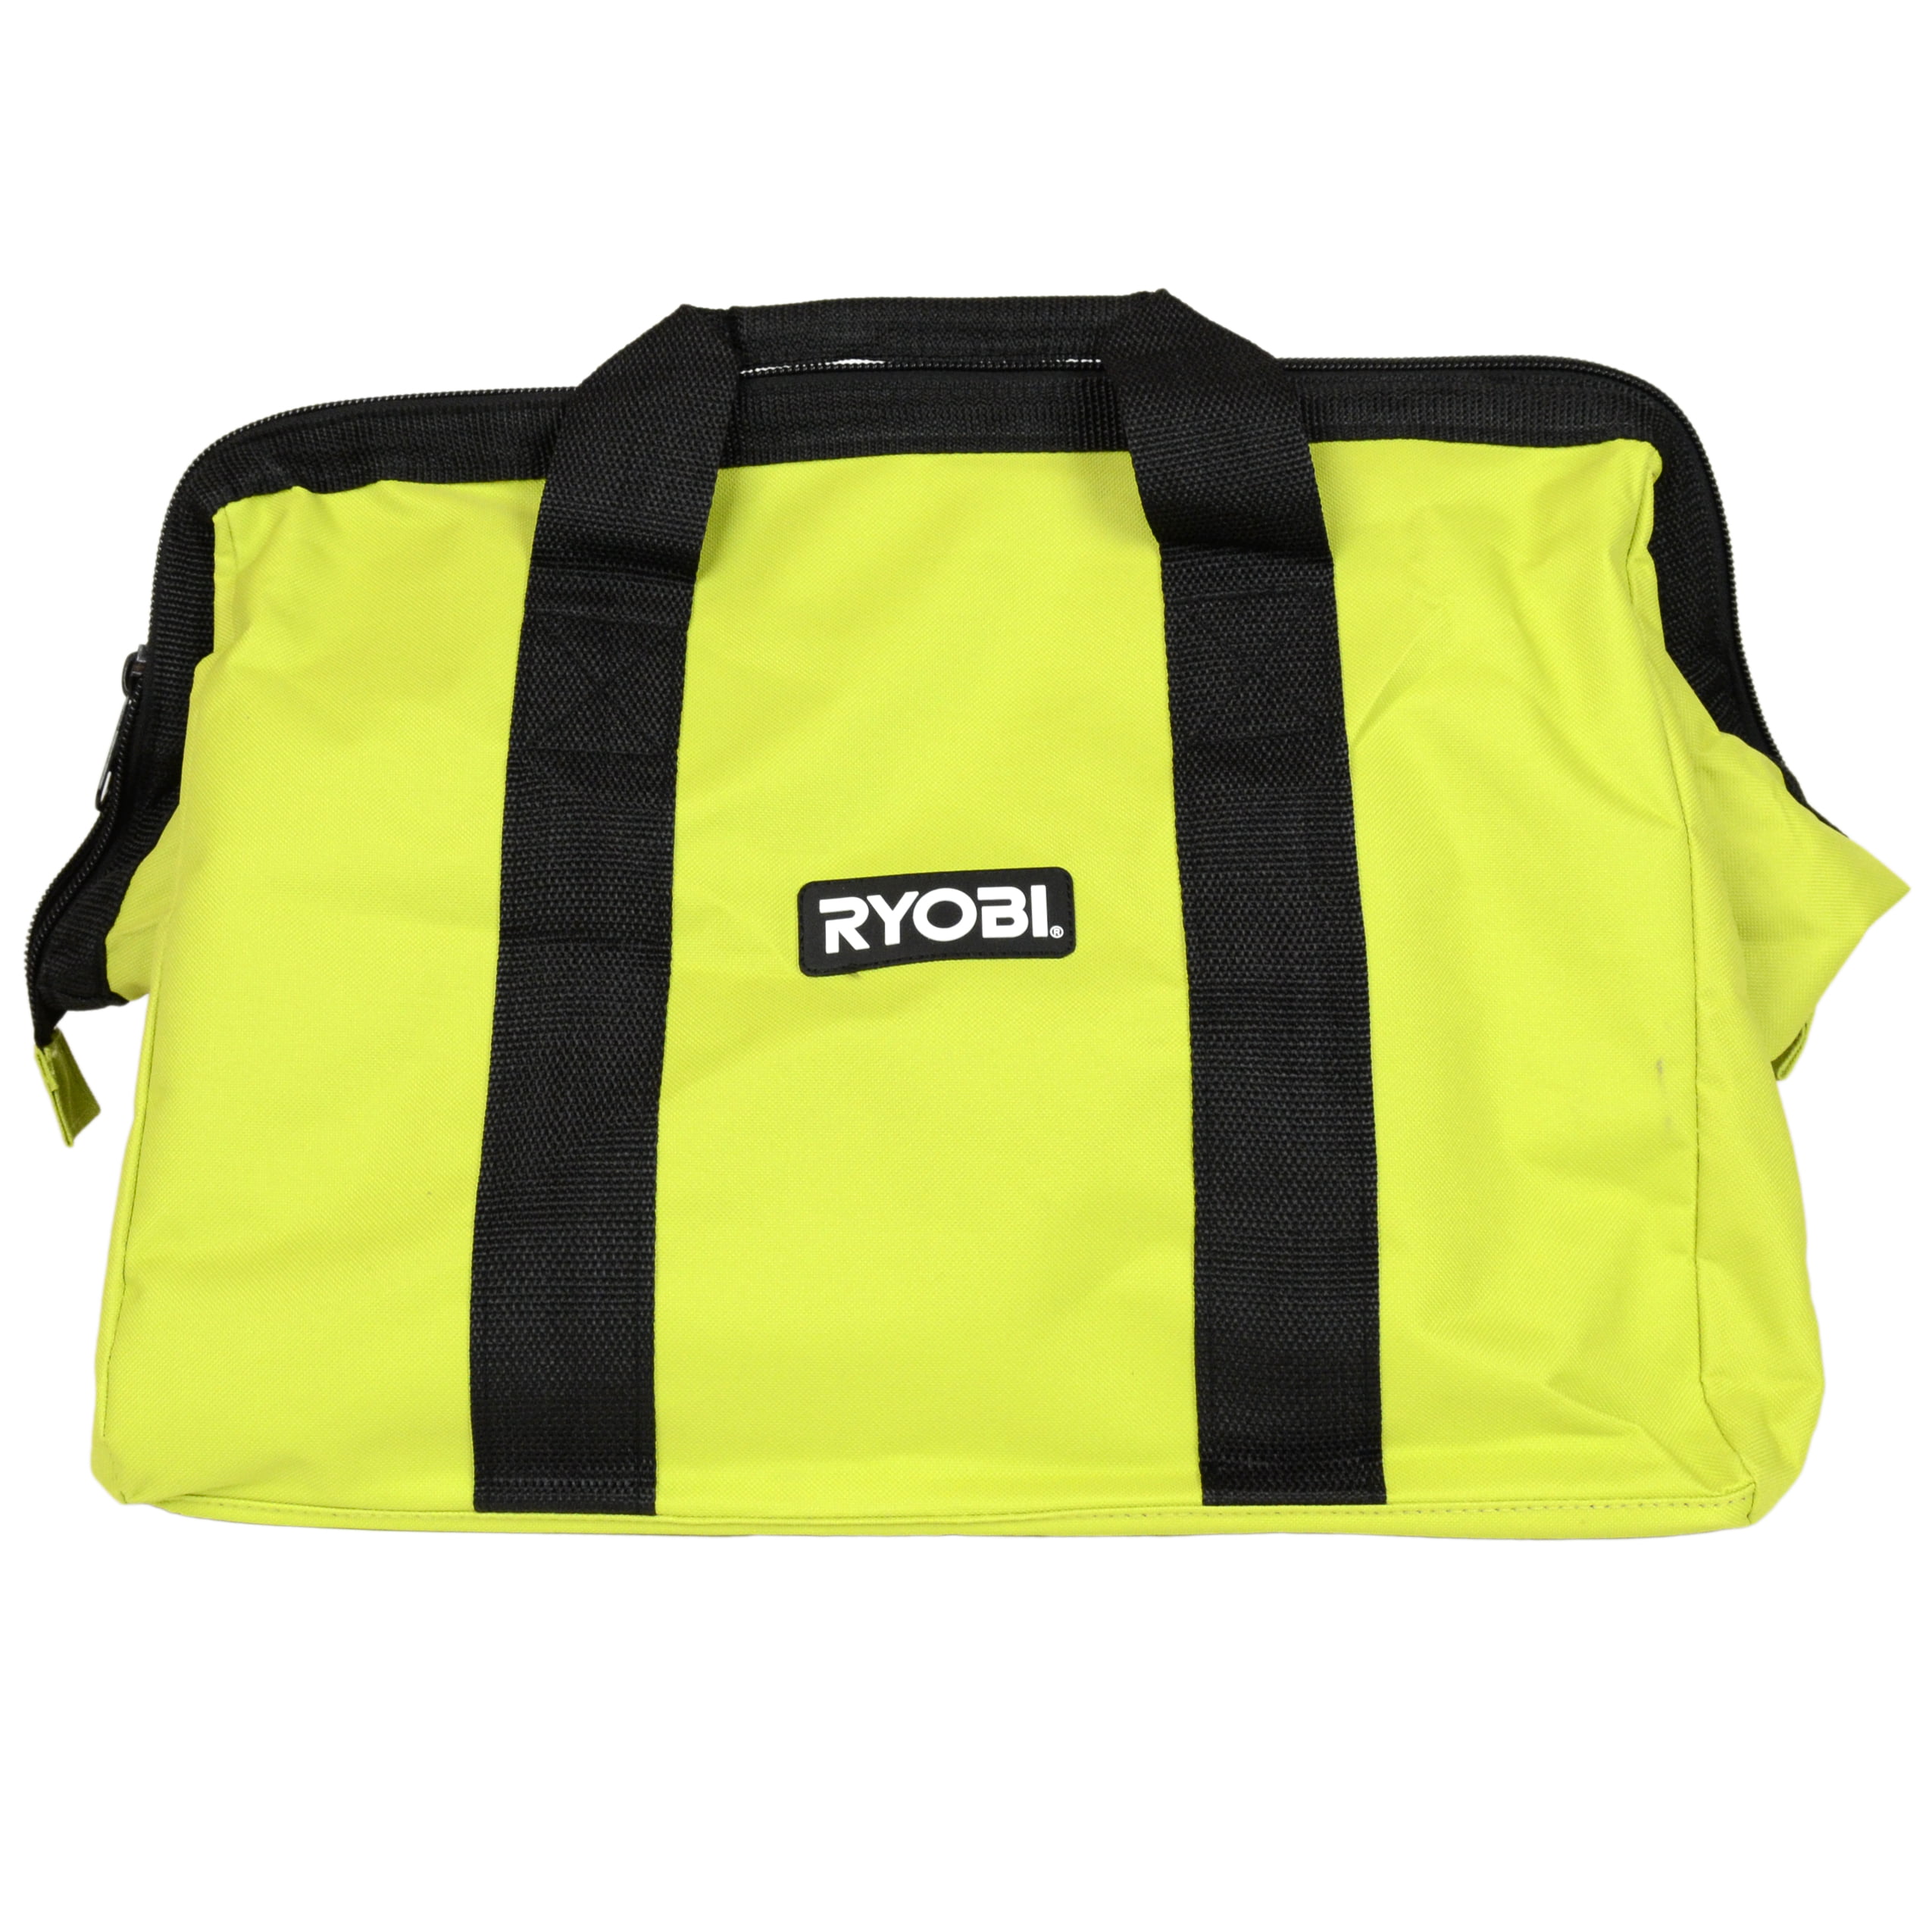 Ryobi OEM Contractor Tool Bag Carrier Duffle Carry-On Pack Thick Fabric Handle 